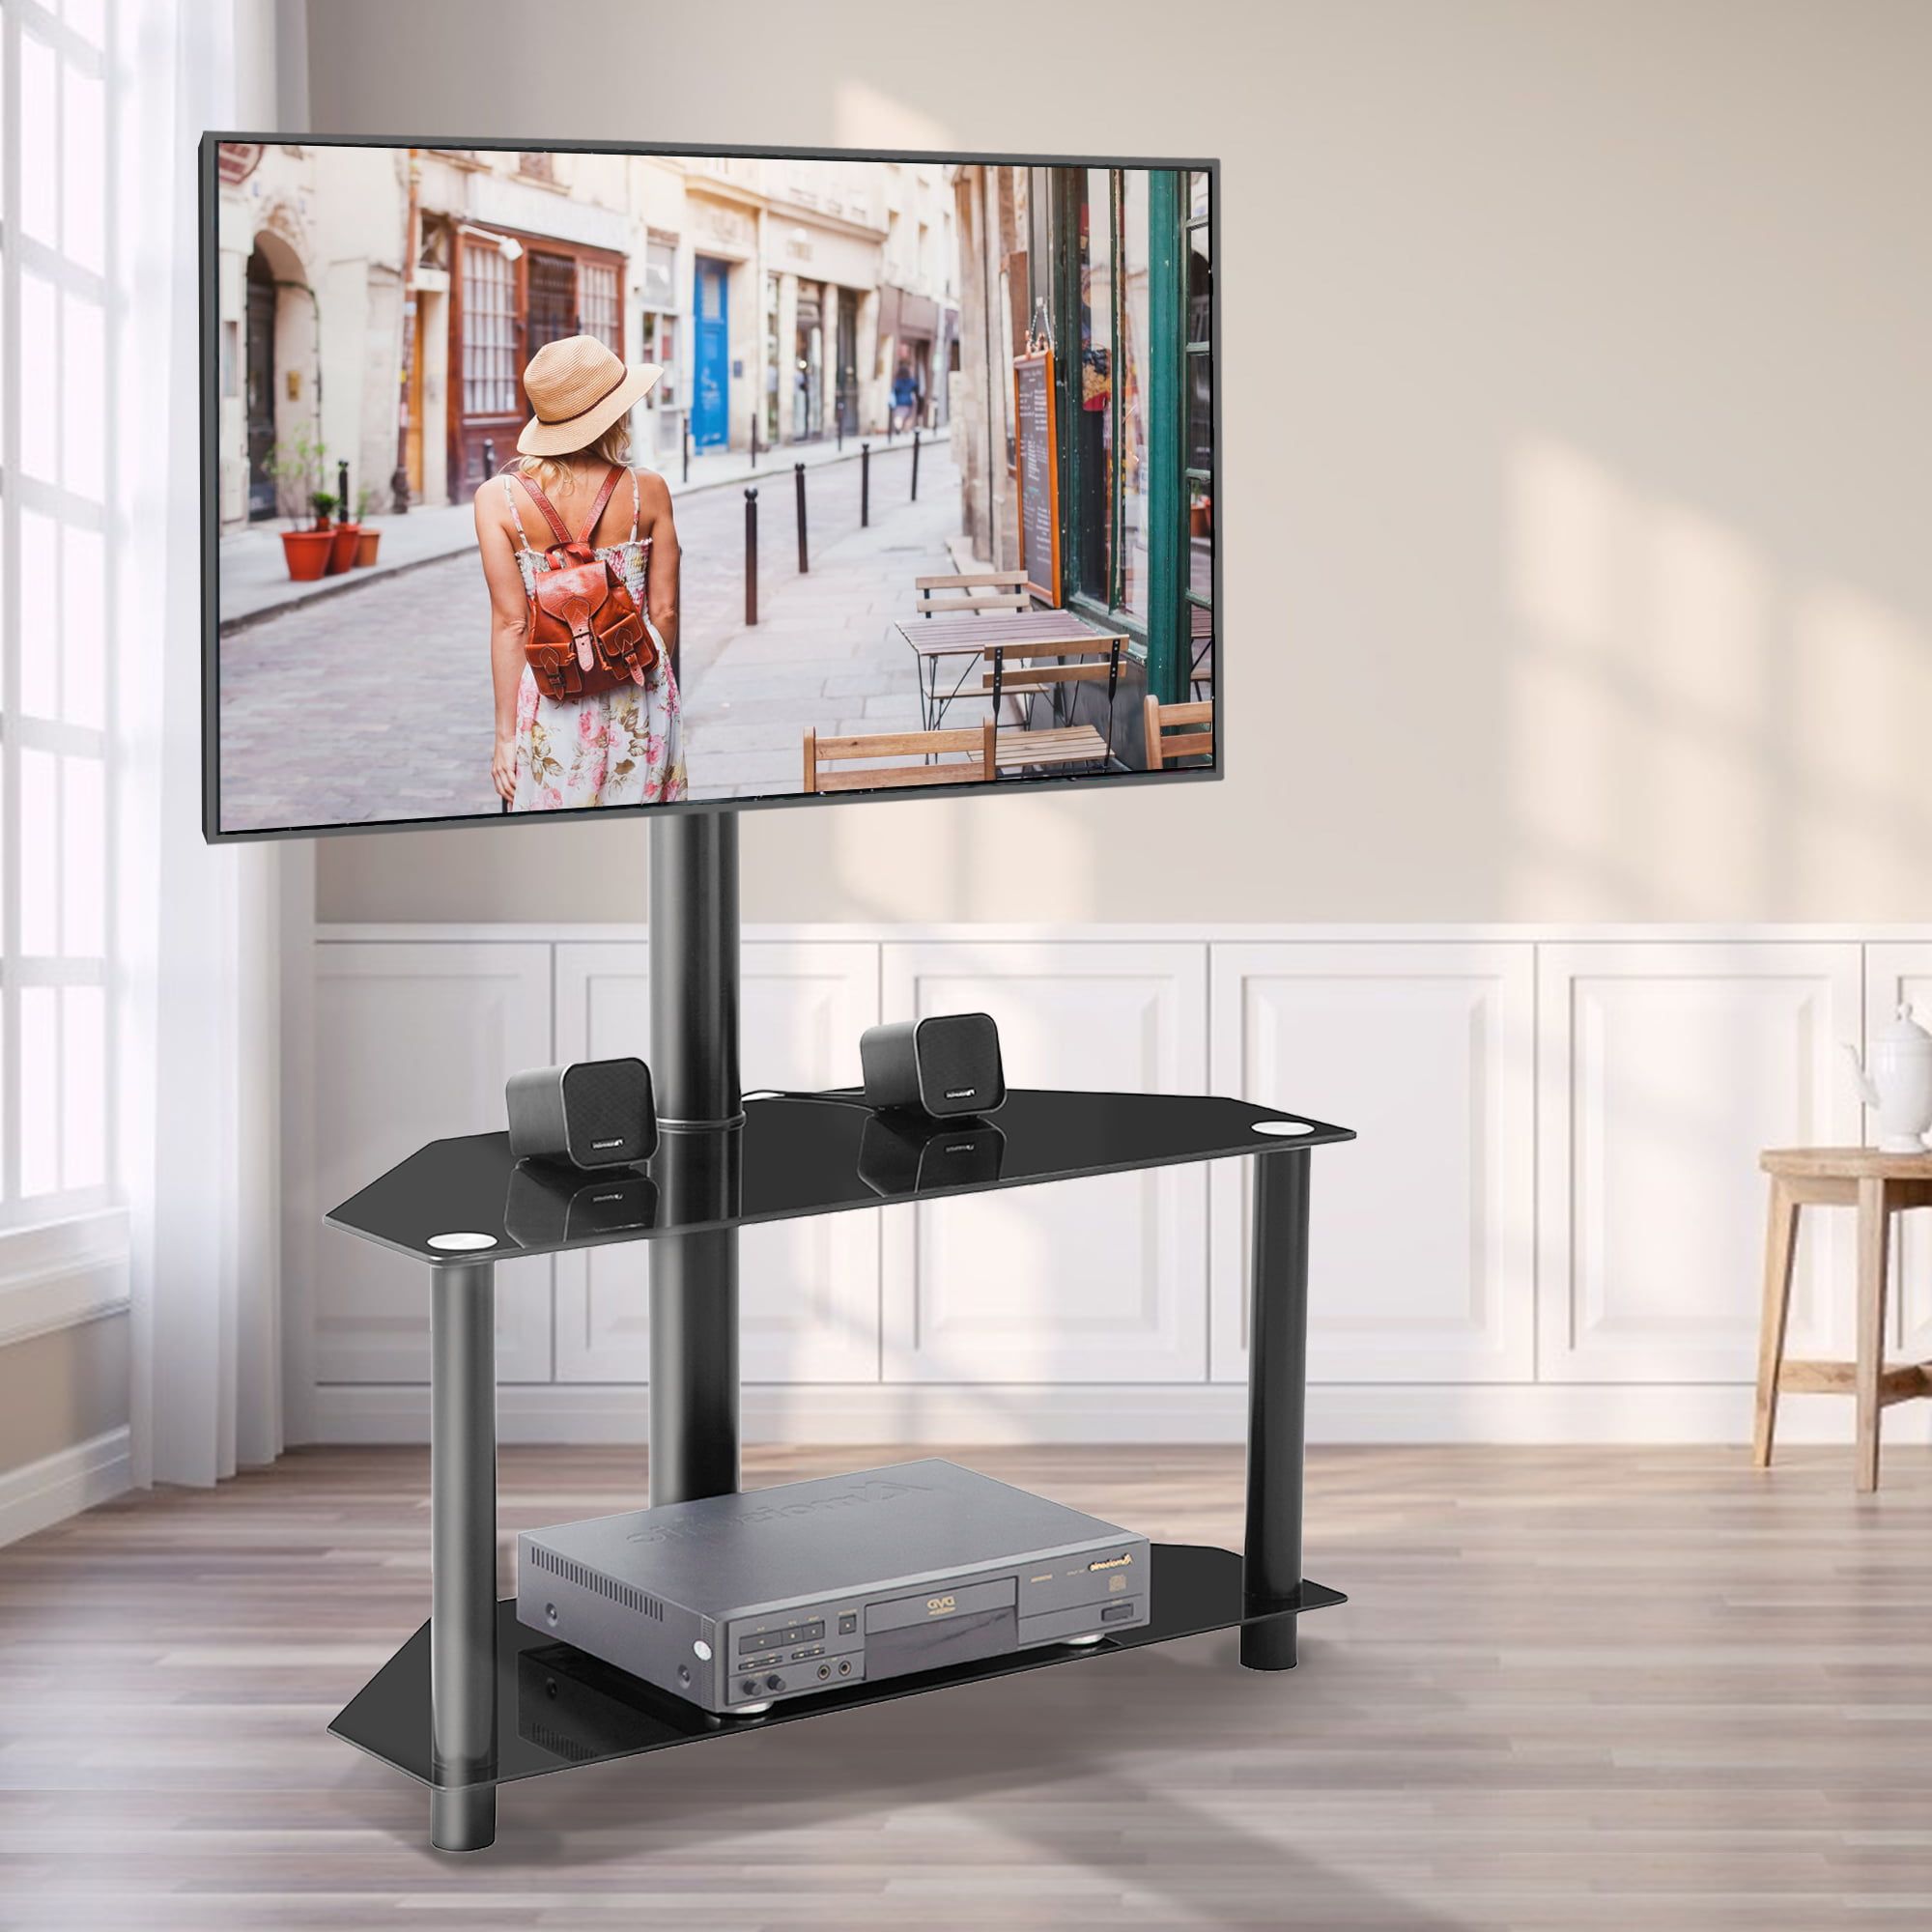 Universal Floor Tv Stand With Swivel Mount, Floor Tv Stand Height Inside Universal Floor Tv Stands (Gallery 5 of 20)